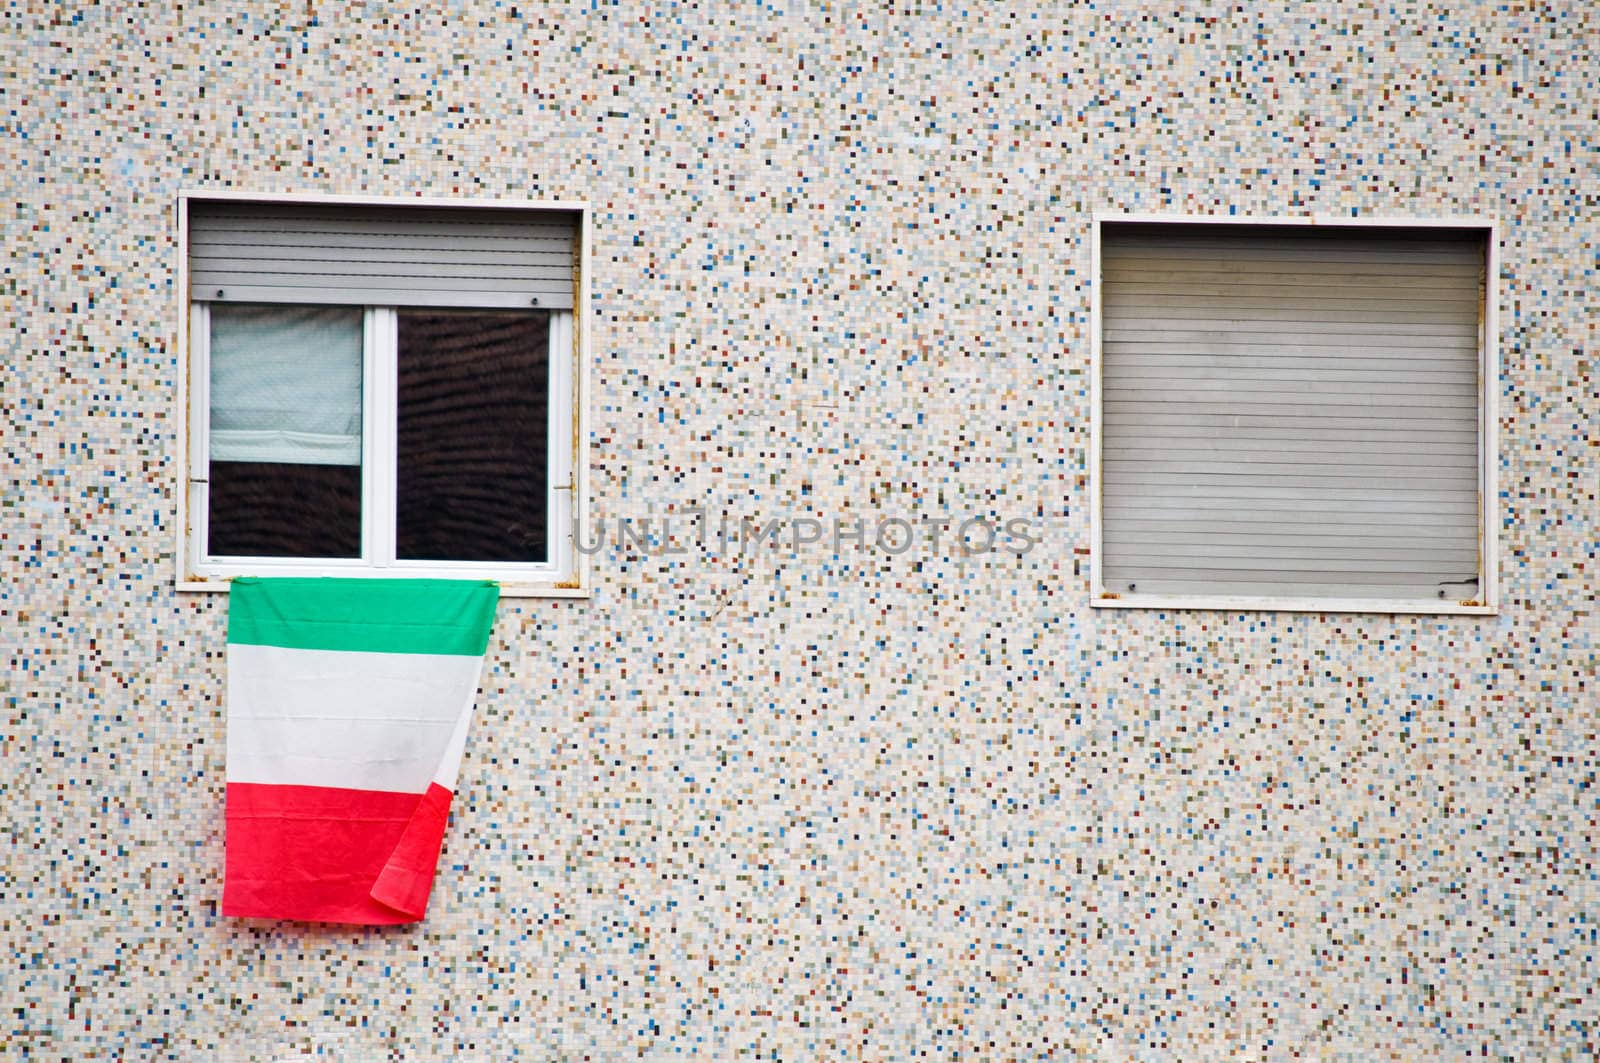 Italian flag on window with balcony in foreground